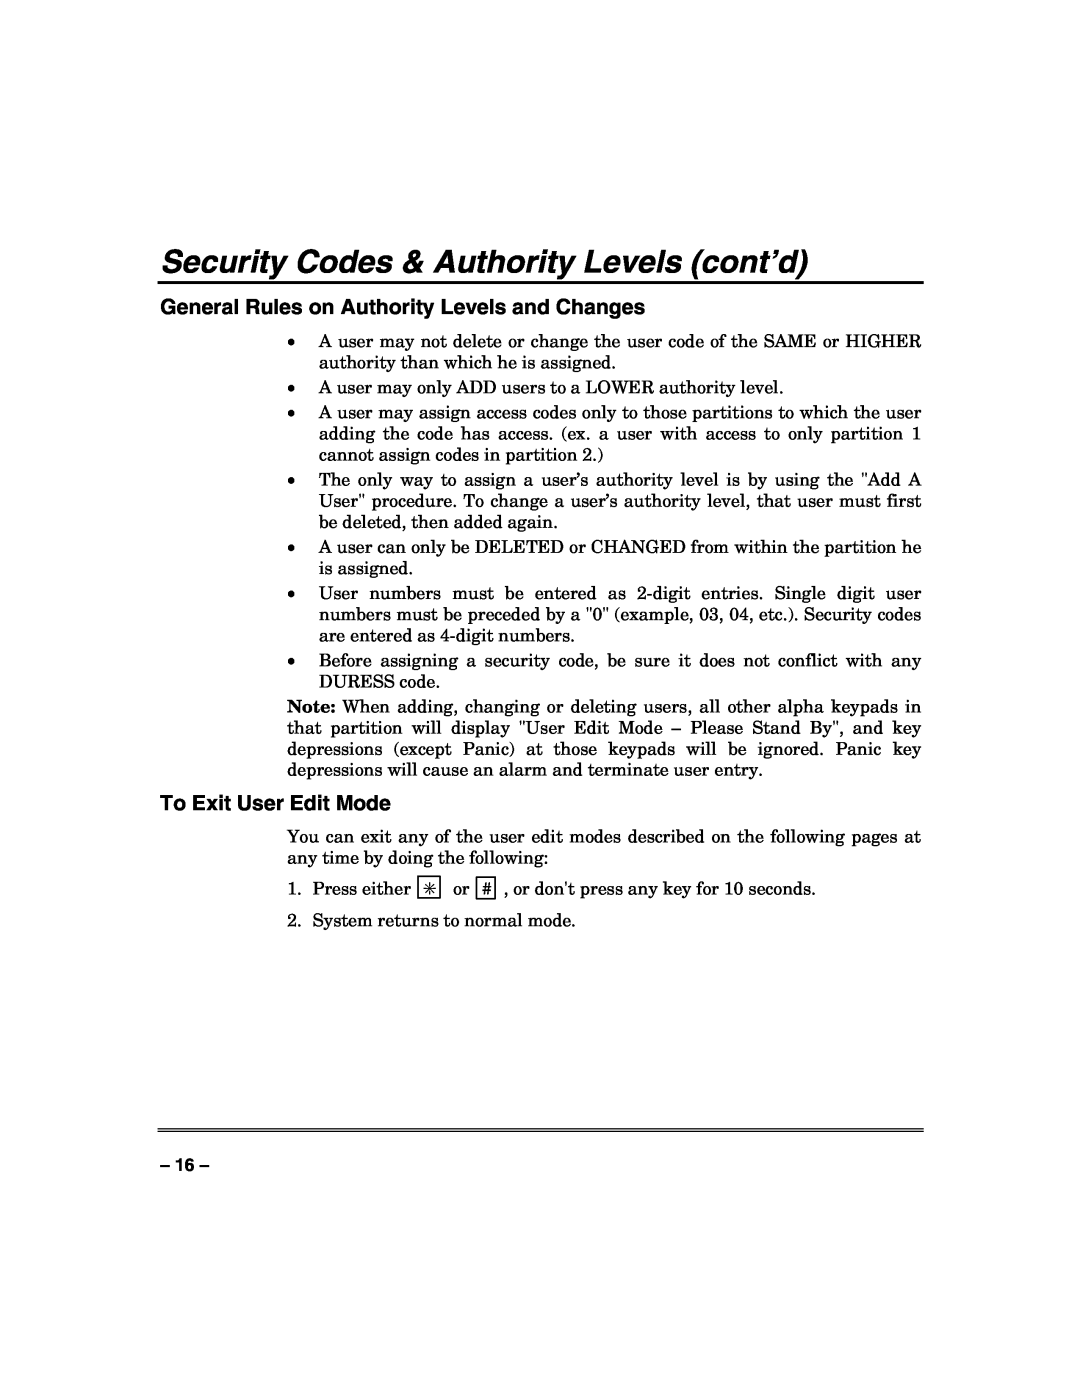 Honeywell N7003V3 manual General Rules on Authority Levels and Changes, To Exit User Edit Mode 